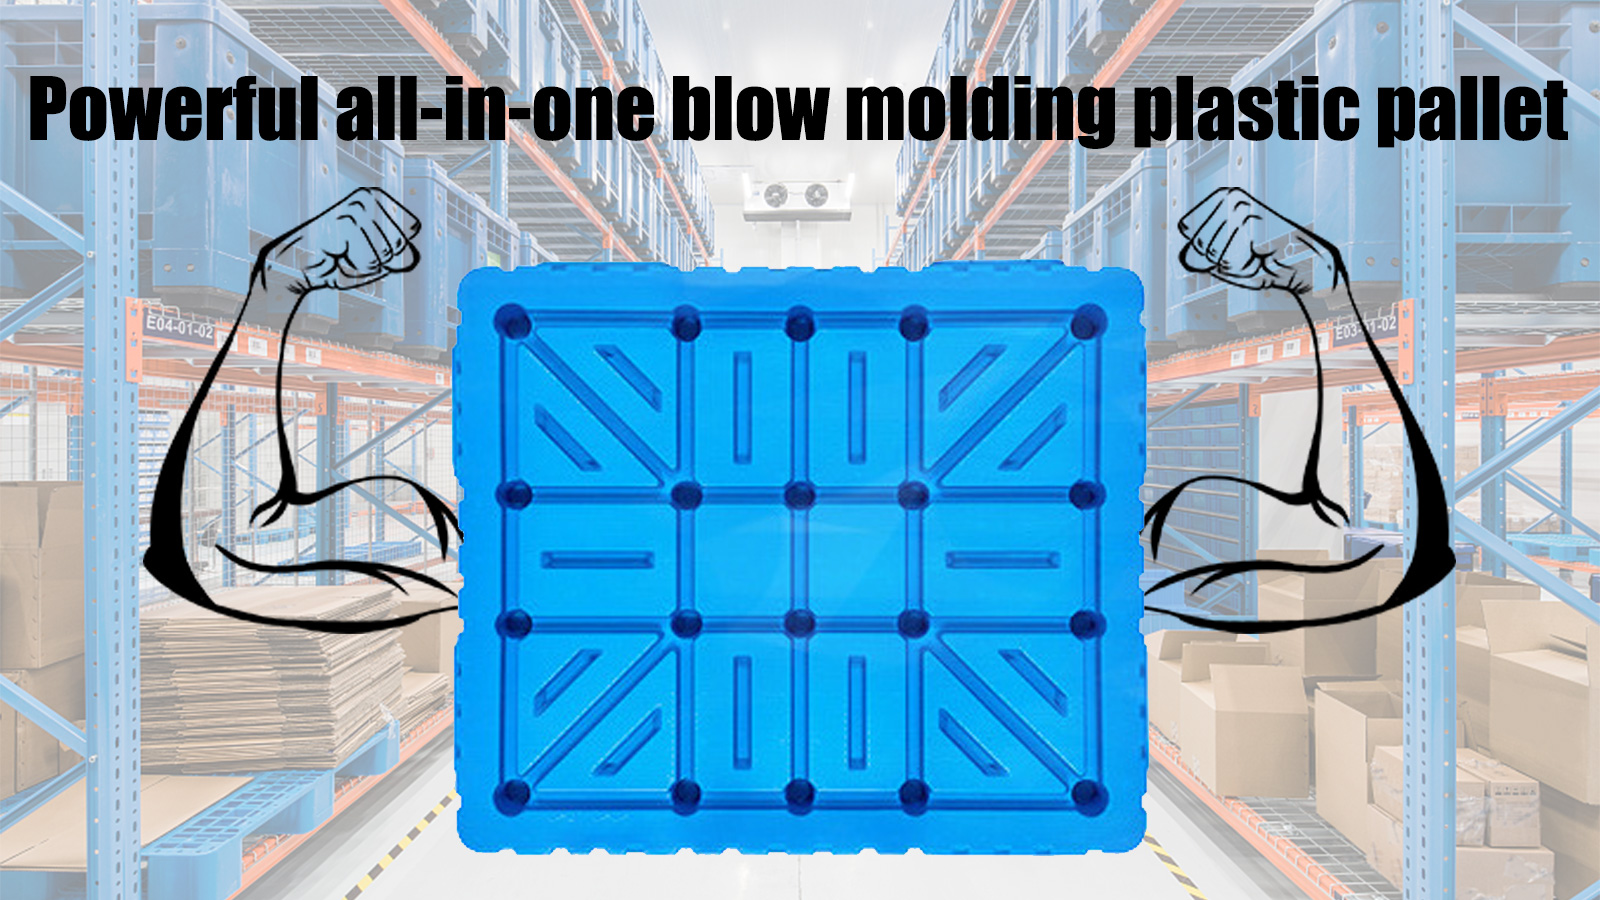 Powerful all-in-one blow molding plastic pallet